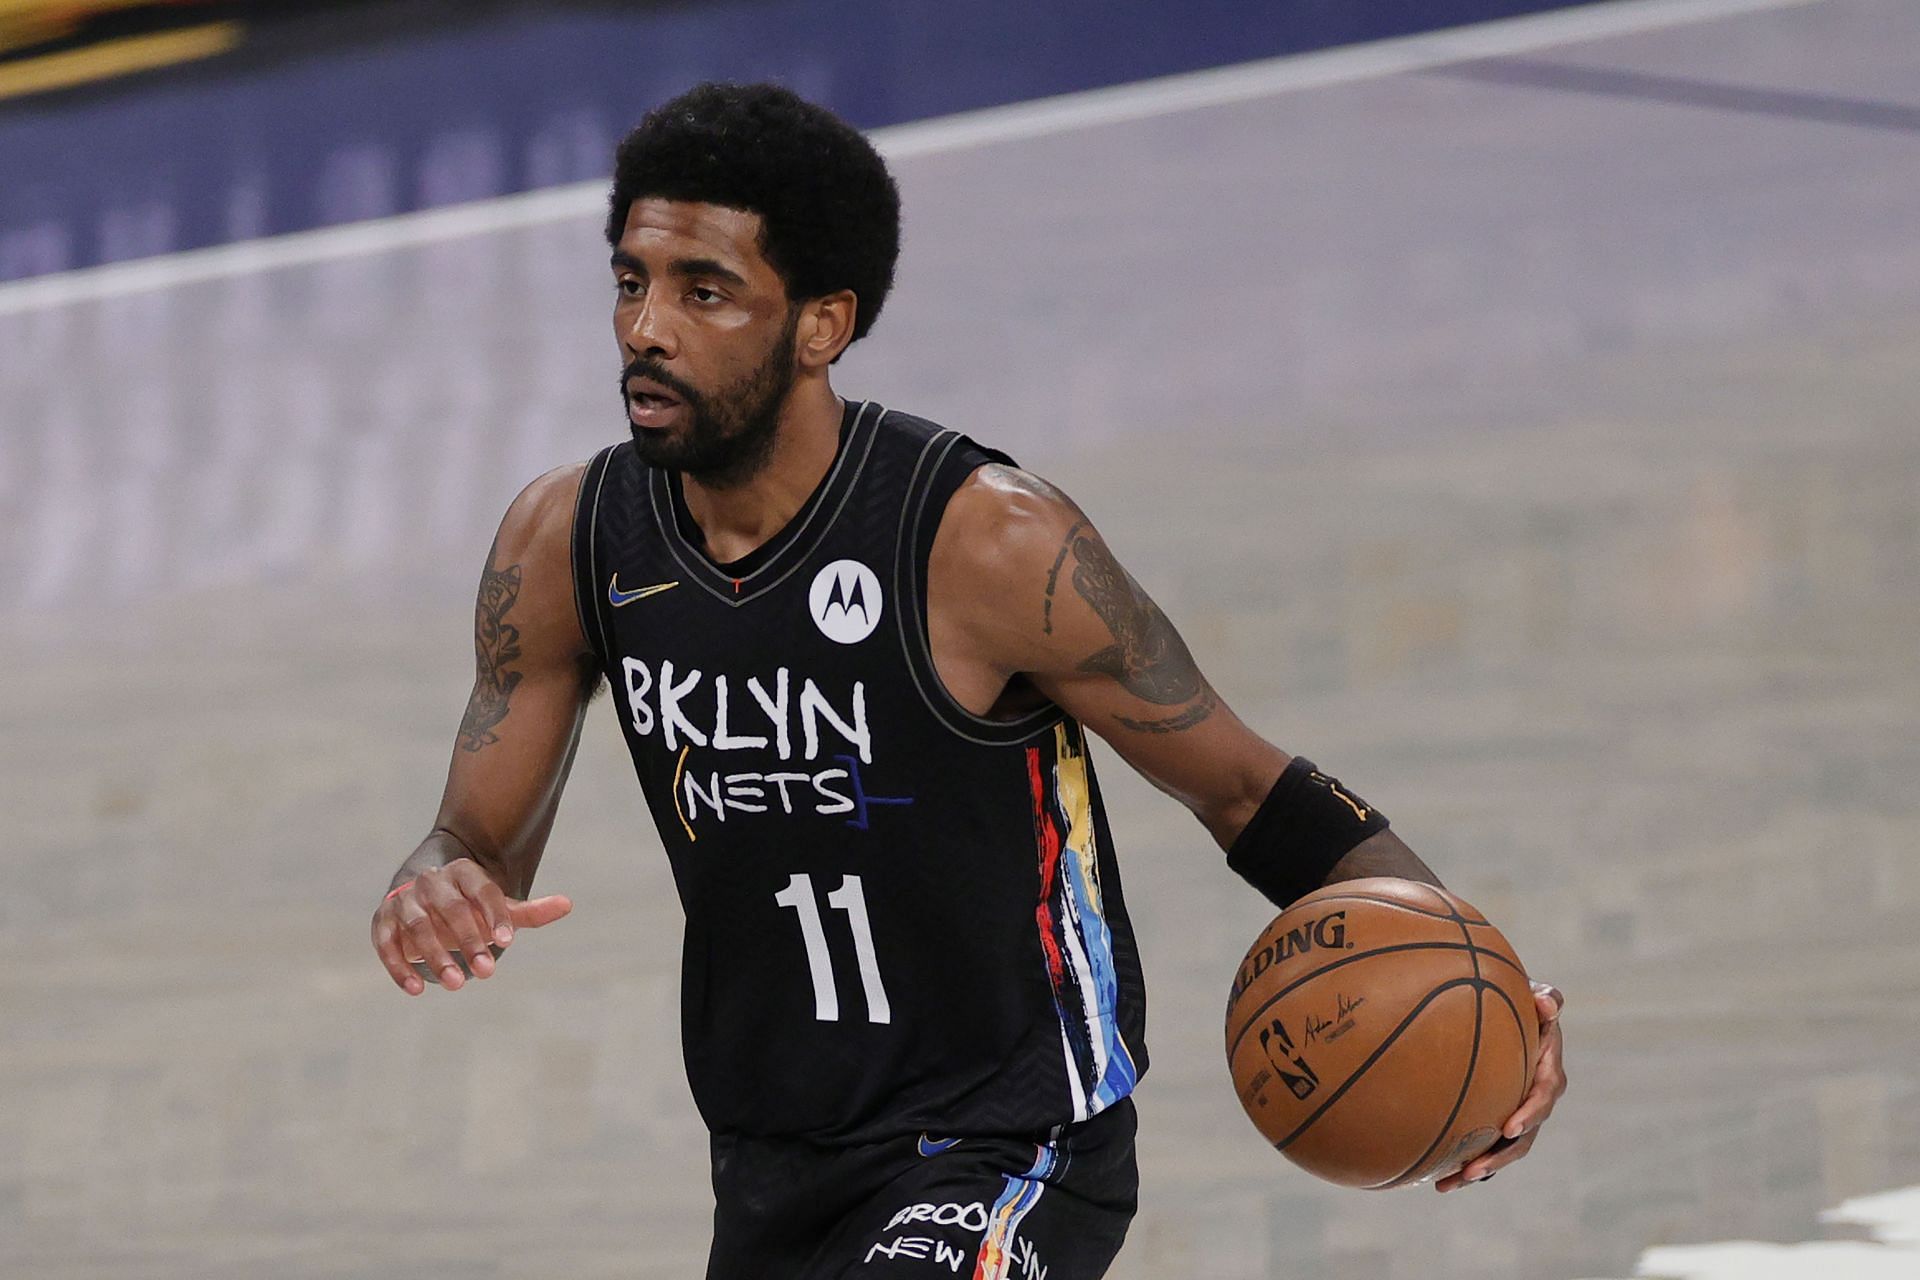 Kyrie Irving in action for the Brooklyn Nets.